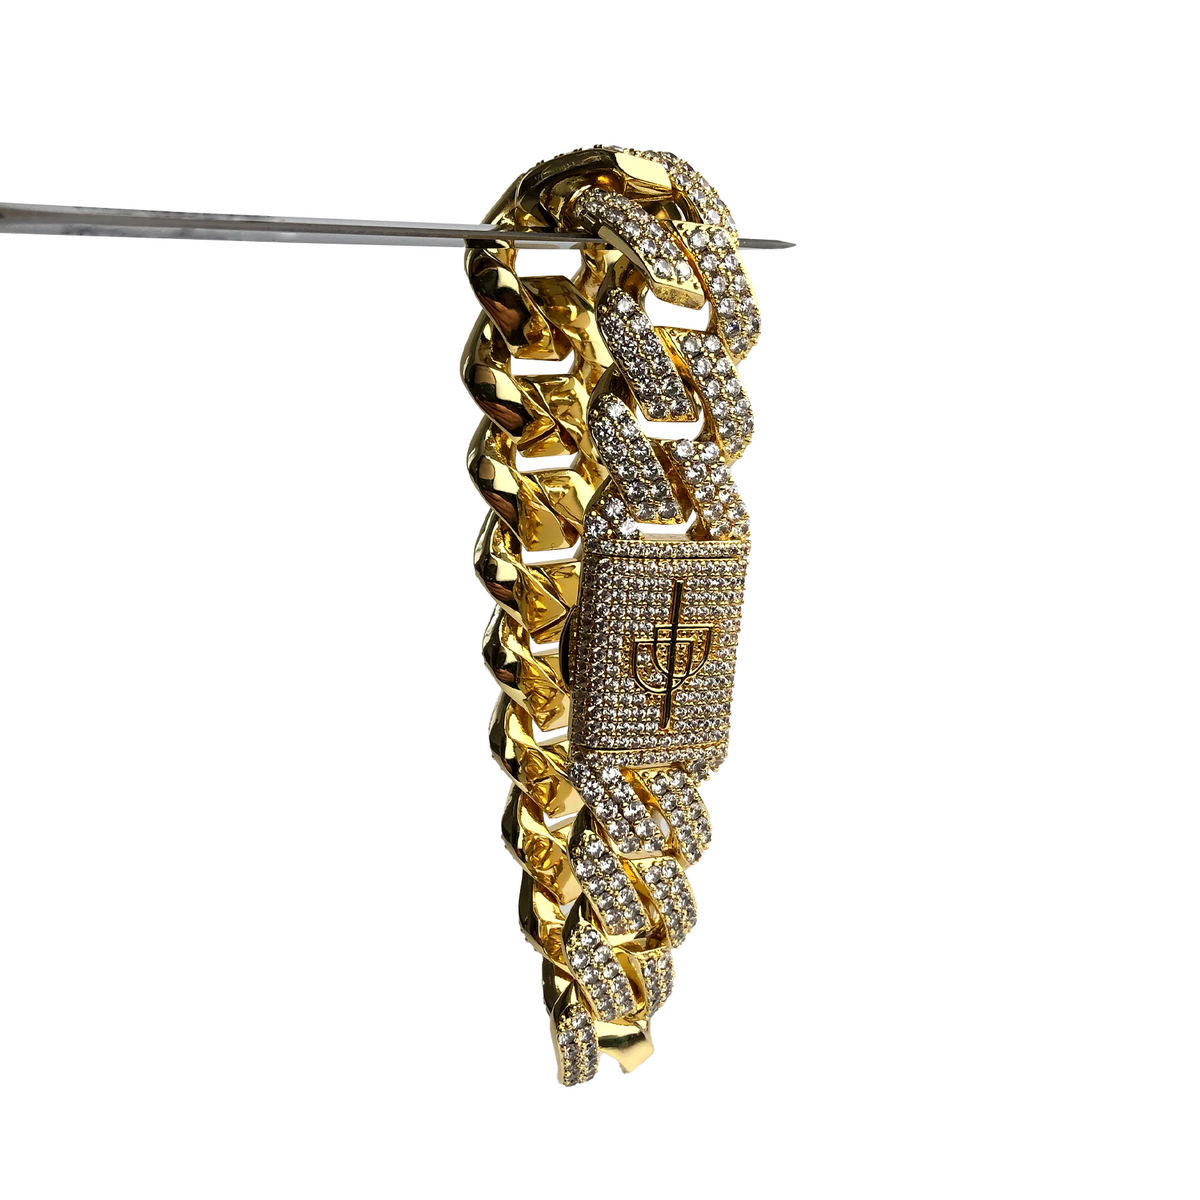 20MM PRONG CUBAN LINK BRACELET [WHITE | YELLOW] GOLD - ICED DRIP JEWELRY 